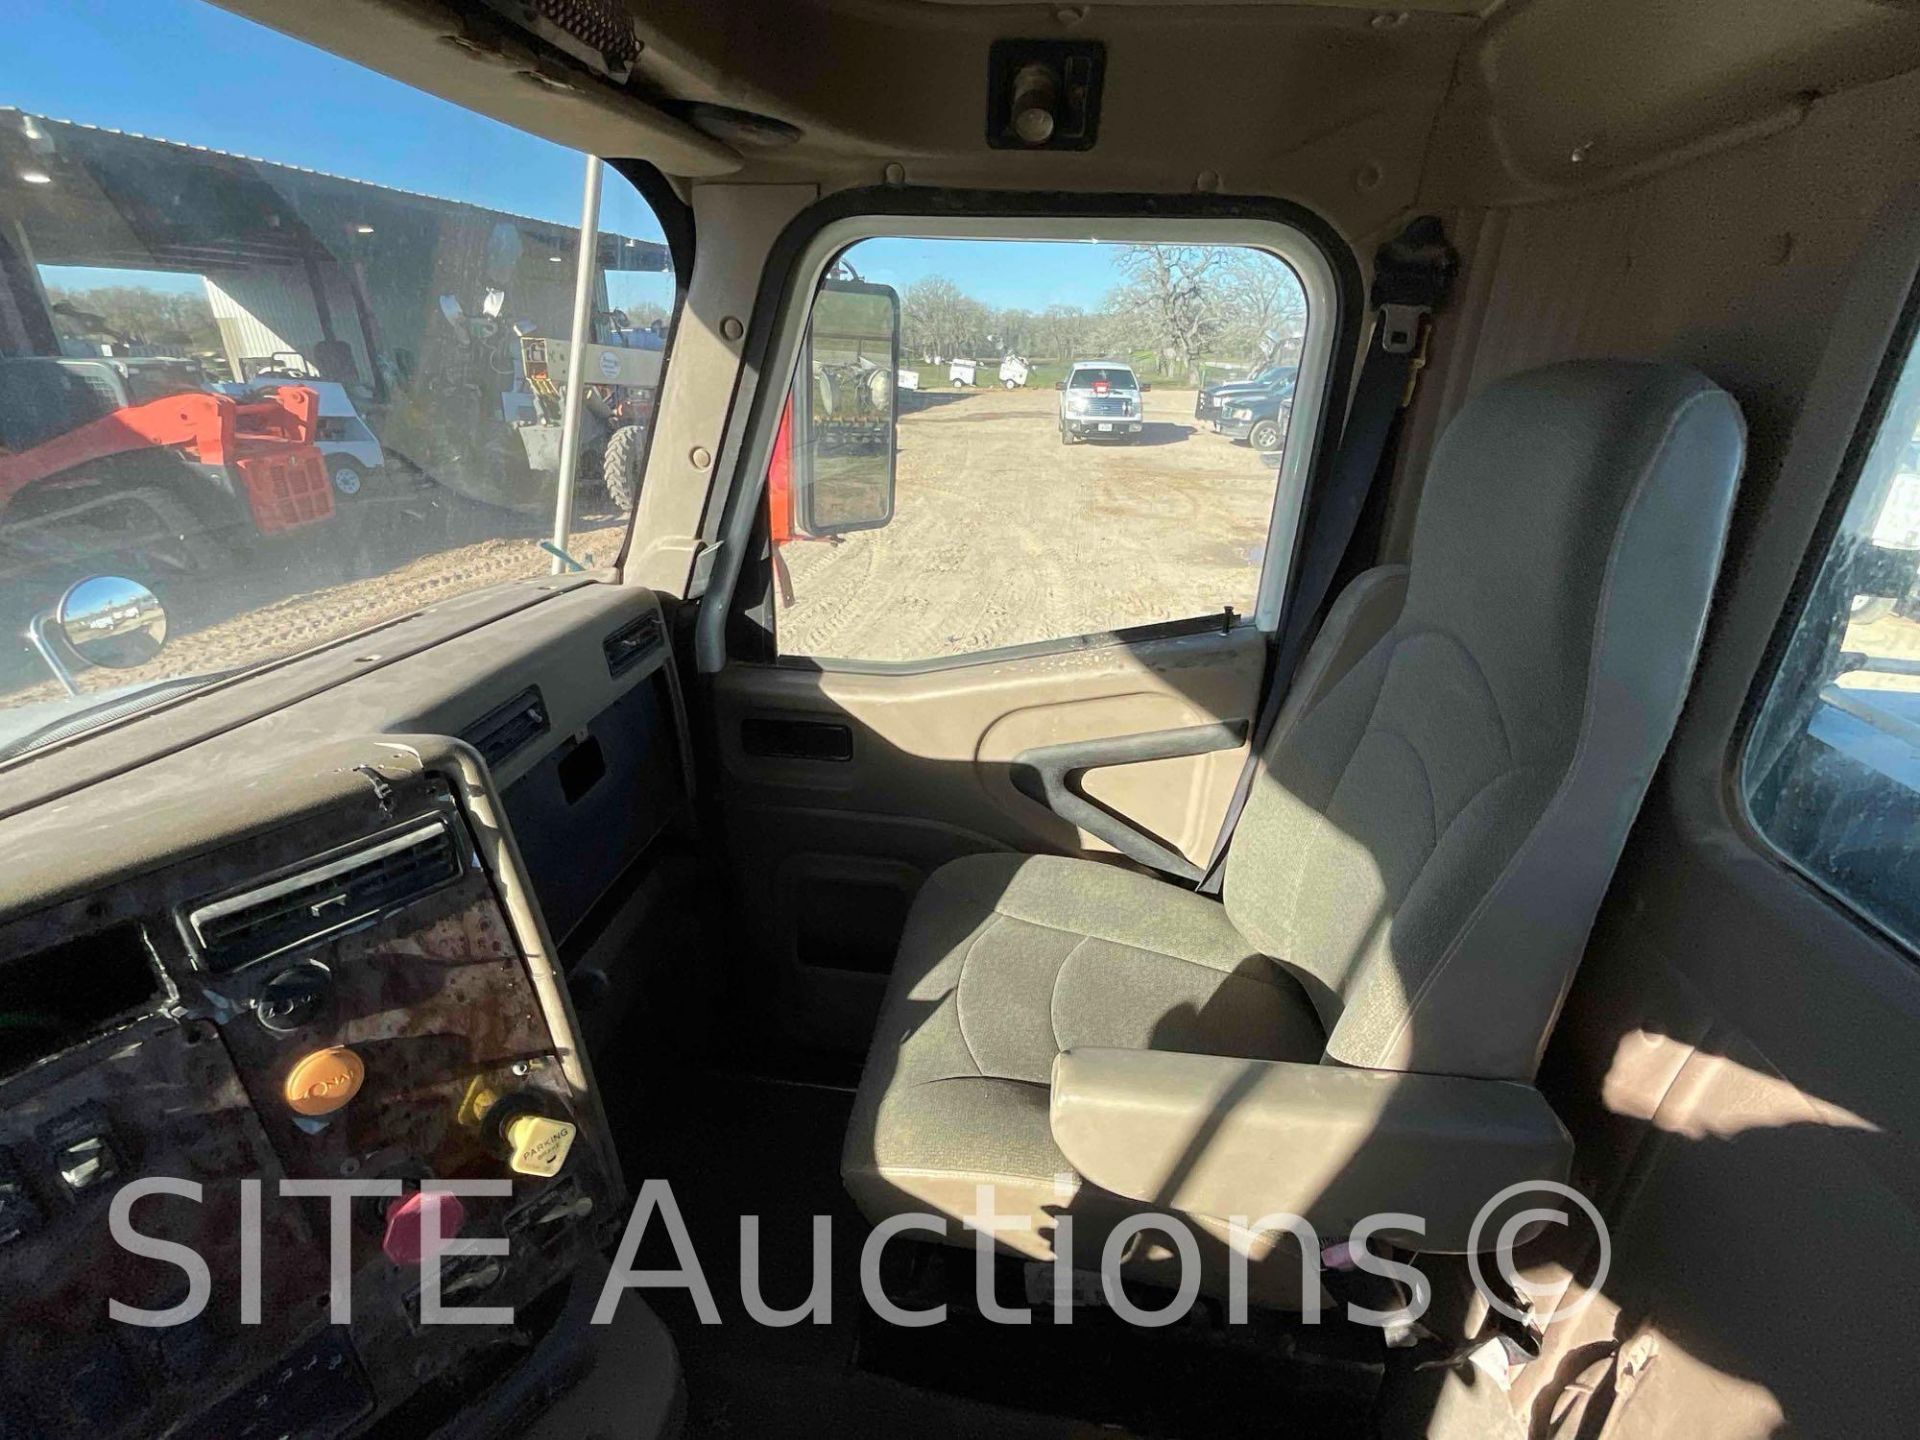 2007 International 9200i S/A Toter Truck - Image 24 of 27